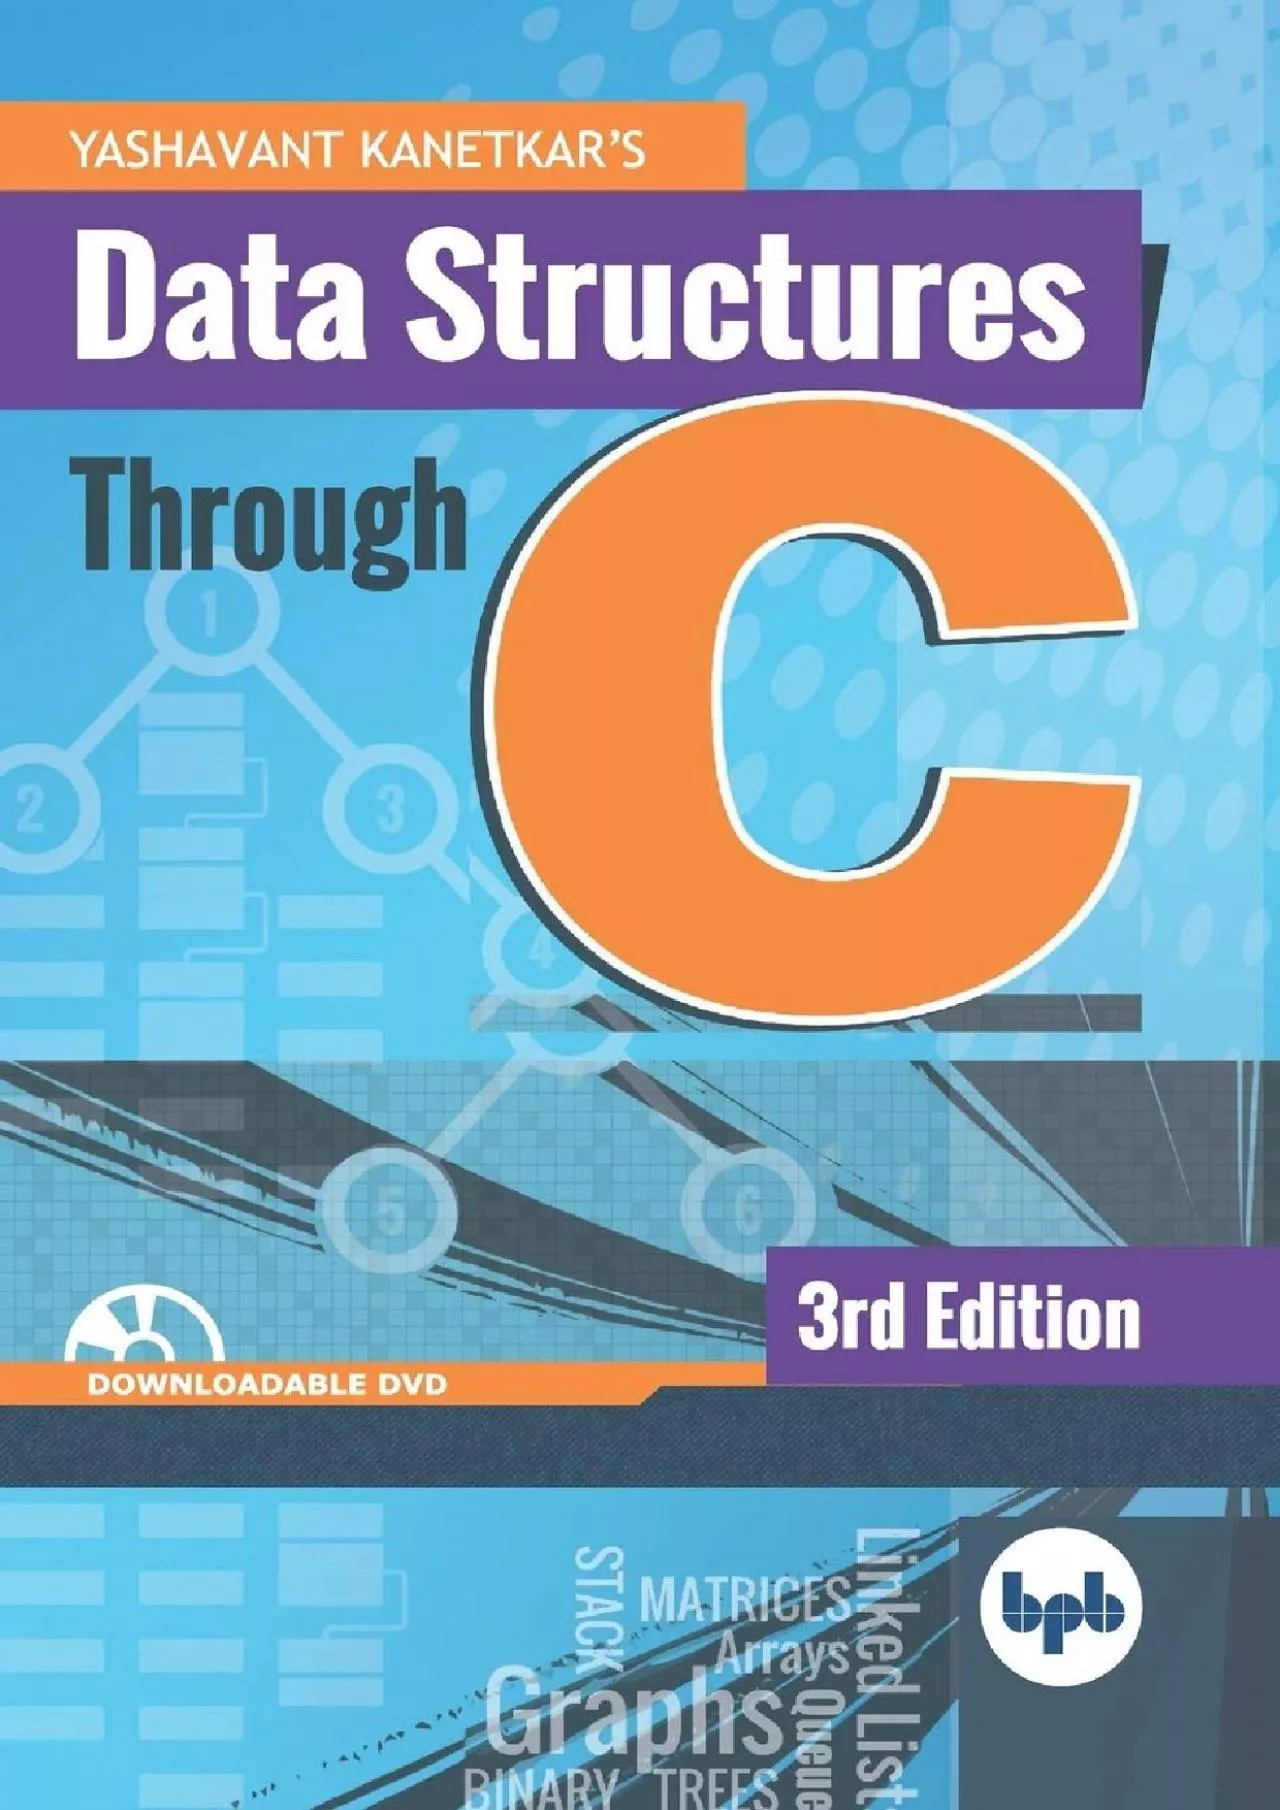 [eBOOK]-Data Structures Through C: Learn the fundamentals of Data Structures through C